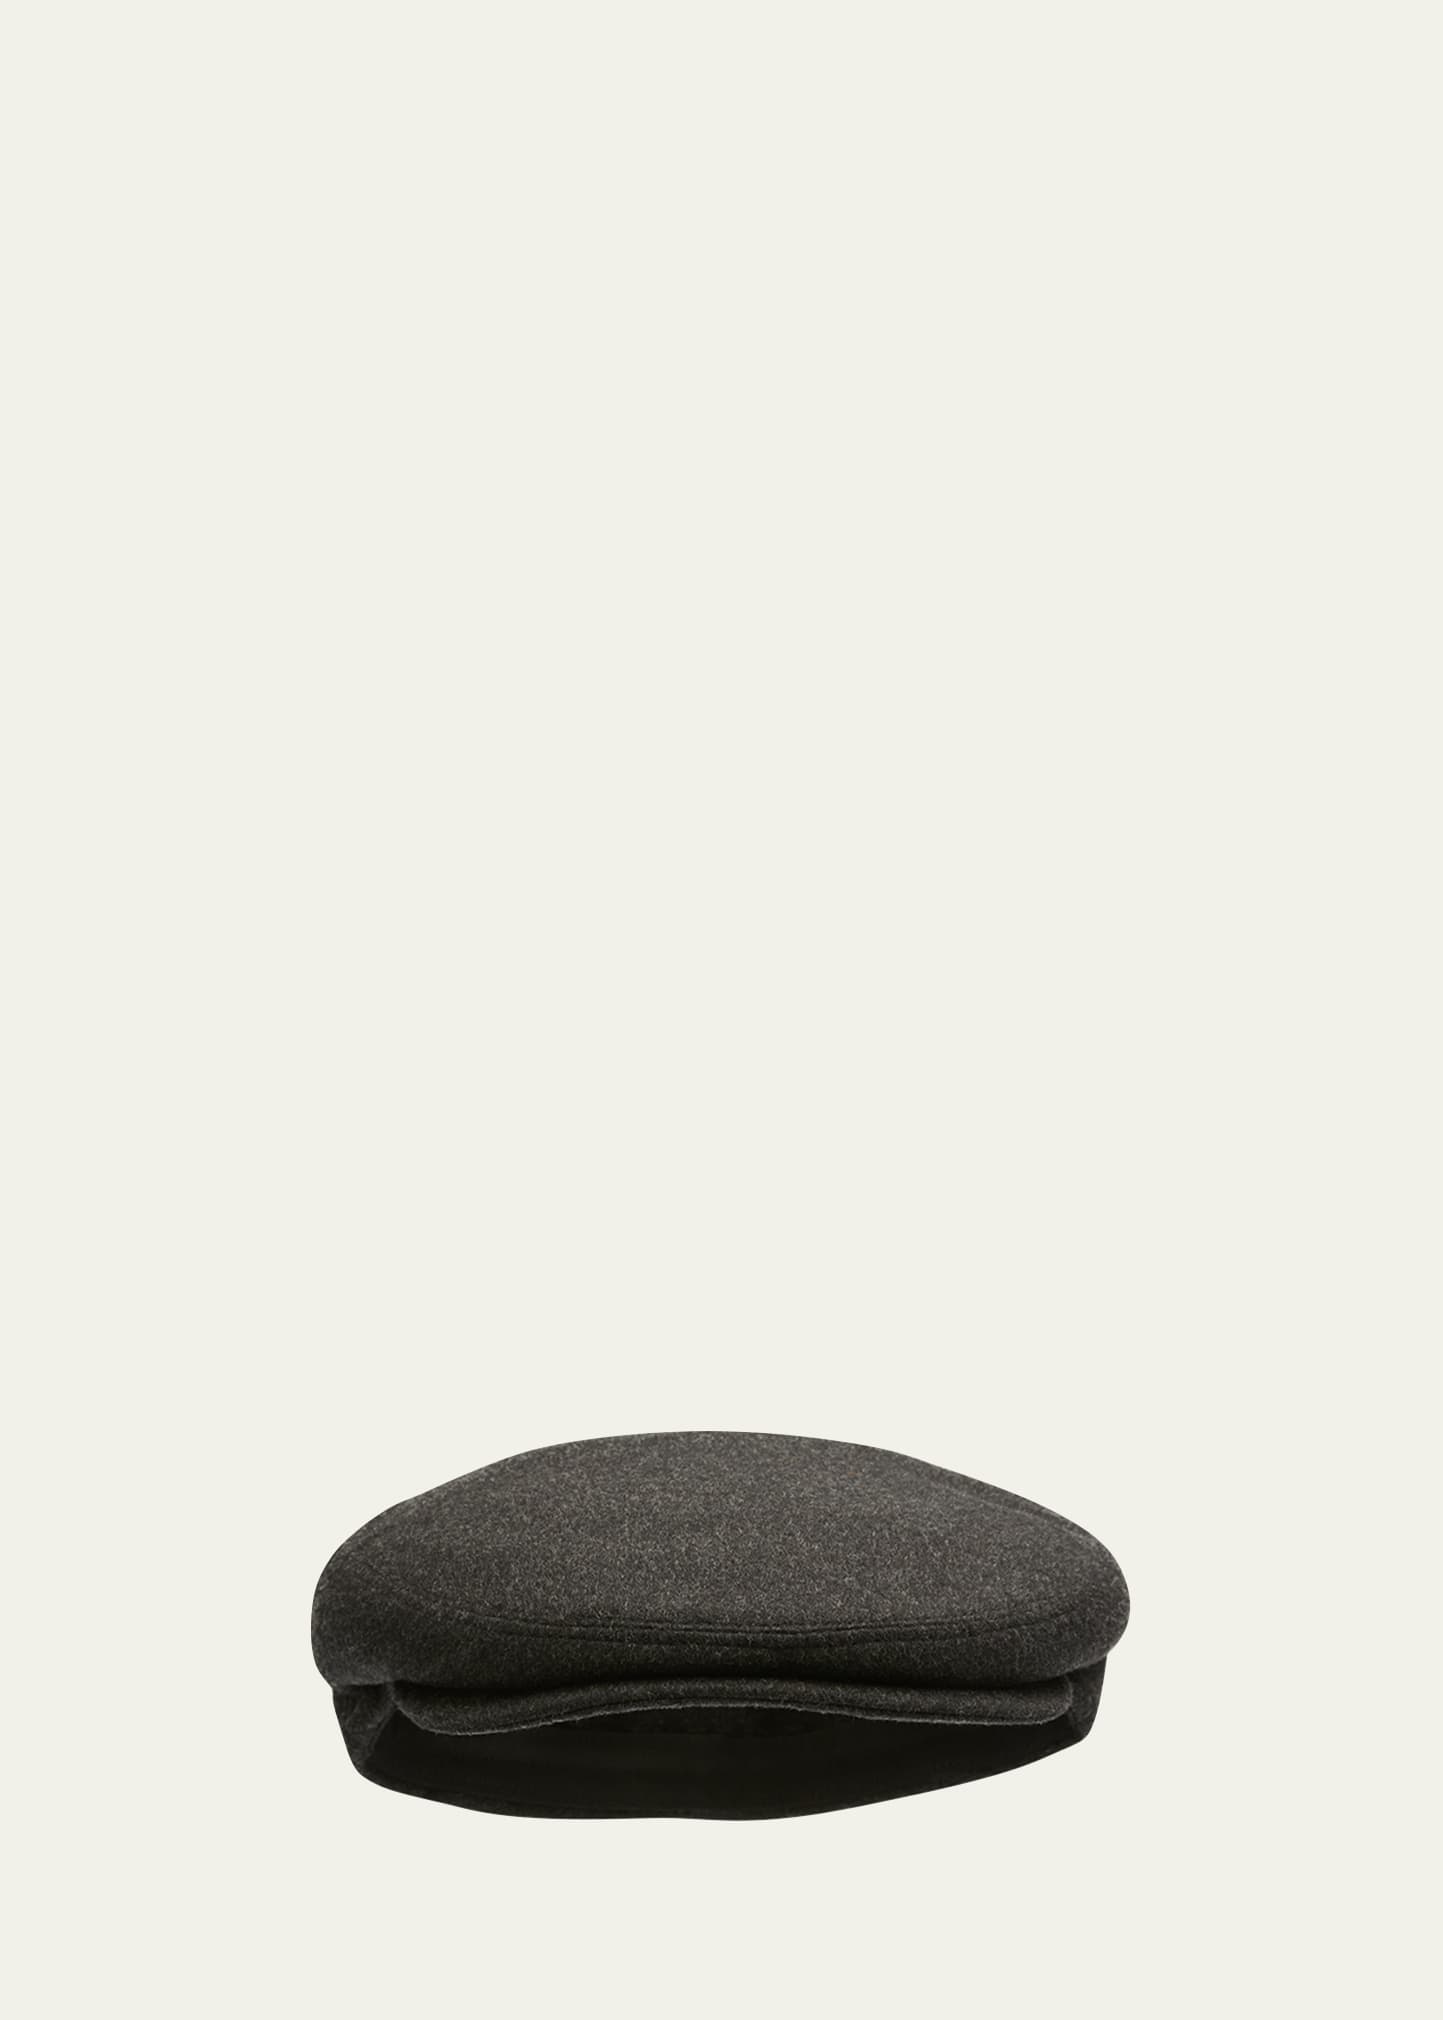 Goodman's Men's Solid Cashmere Driver Hat In Gray Pattern